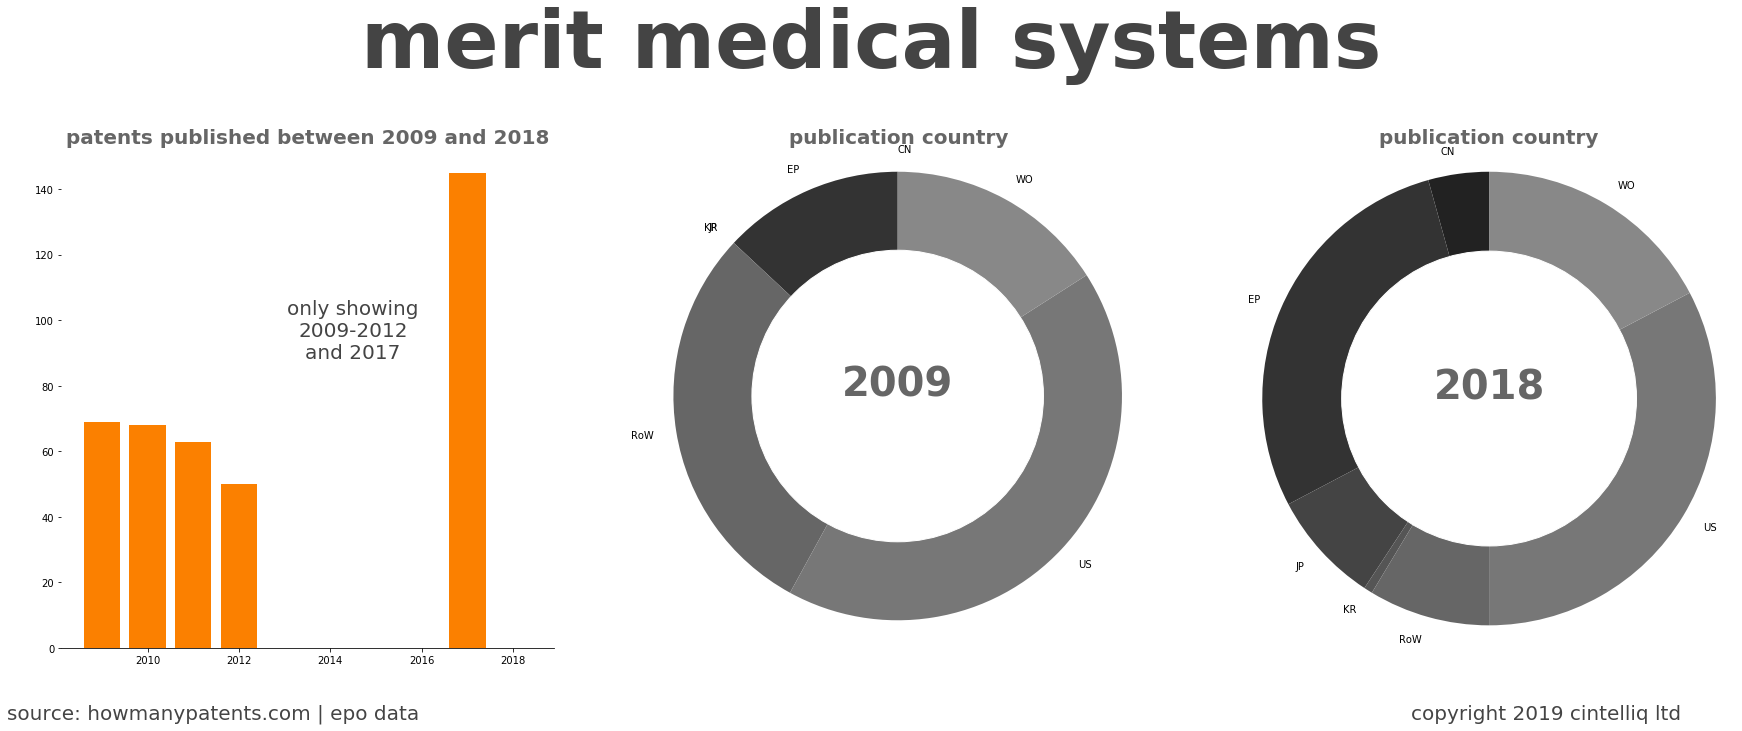 summary of patents for Merit Medical Systems